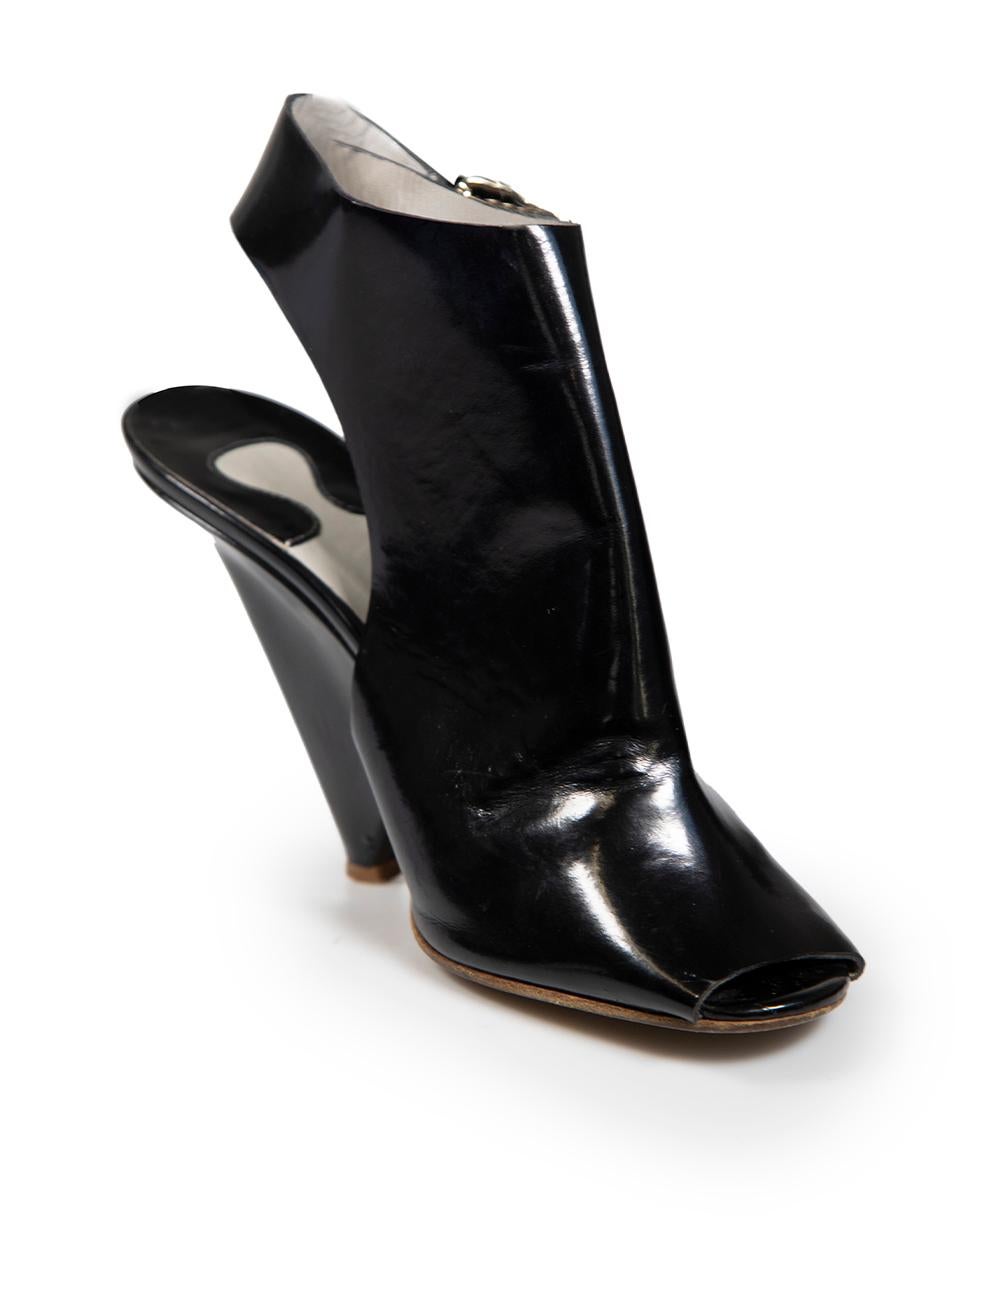 CONDITION is Good. General wear to boots is evident. Moderate signs of wear to overall leather with creasing on toe creases, scuffing and chipping to back of both heels on this used Chloé designer resale item.
 
 
 
 Details
 
 
 Black
 
 Patent